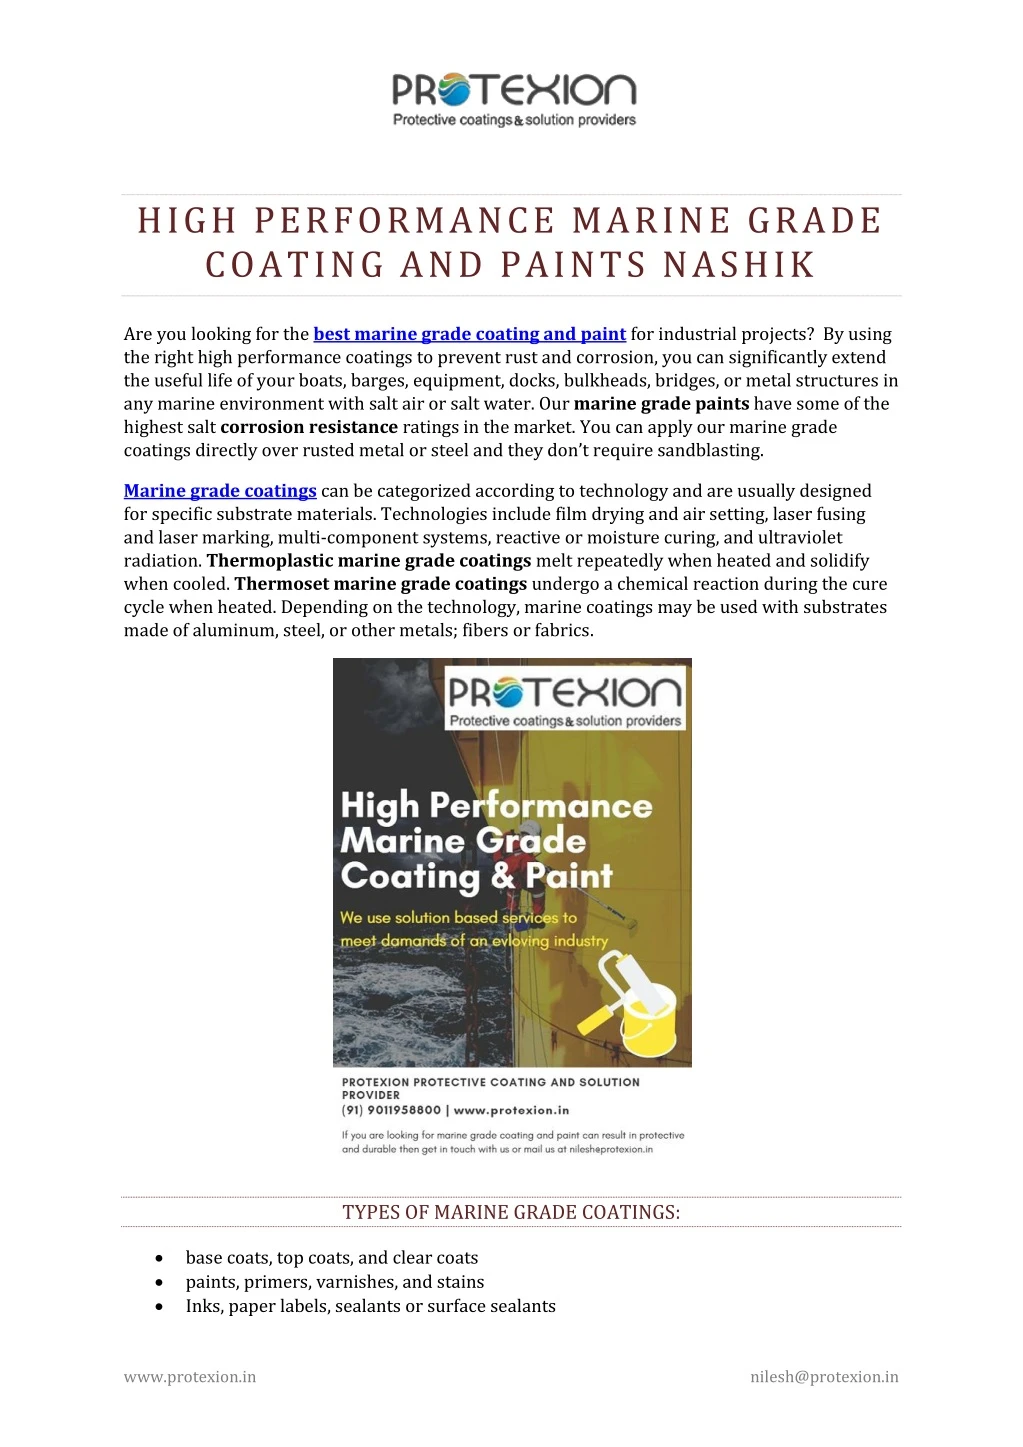 high performance marine grade coating and paints